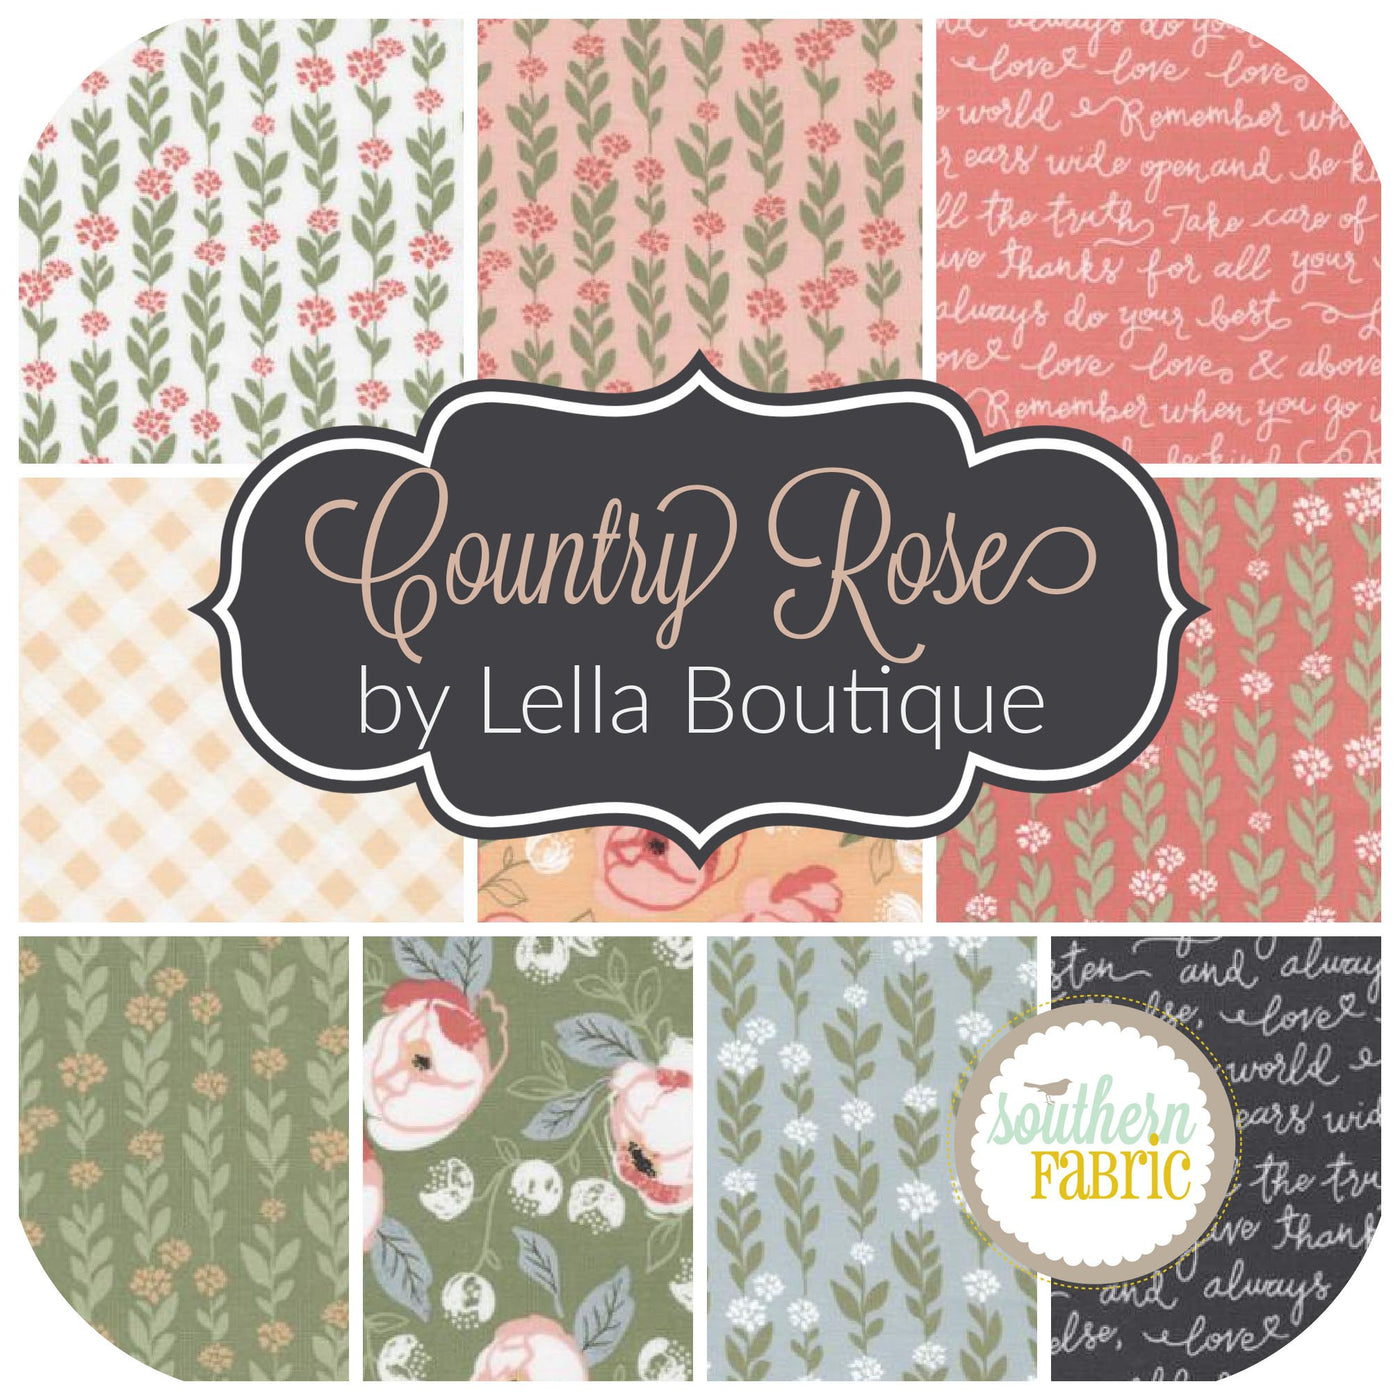 Country Rose Half Yard Bundle (10 pcs) by Lella Boutique for Southern Fabric (LB.CR.HY)